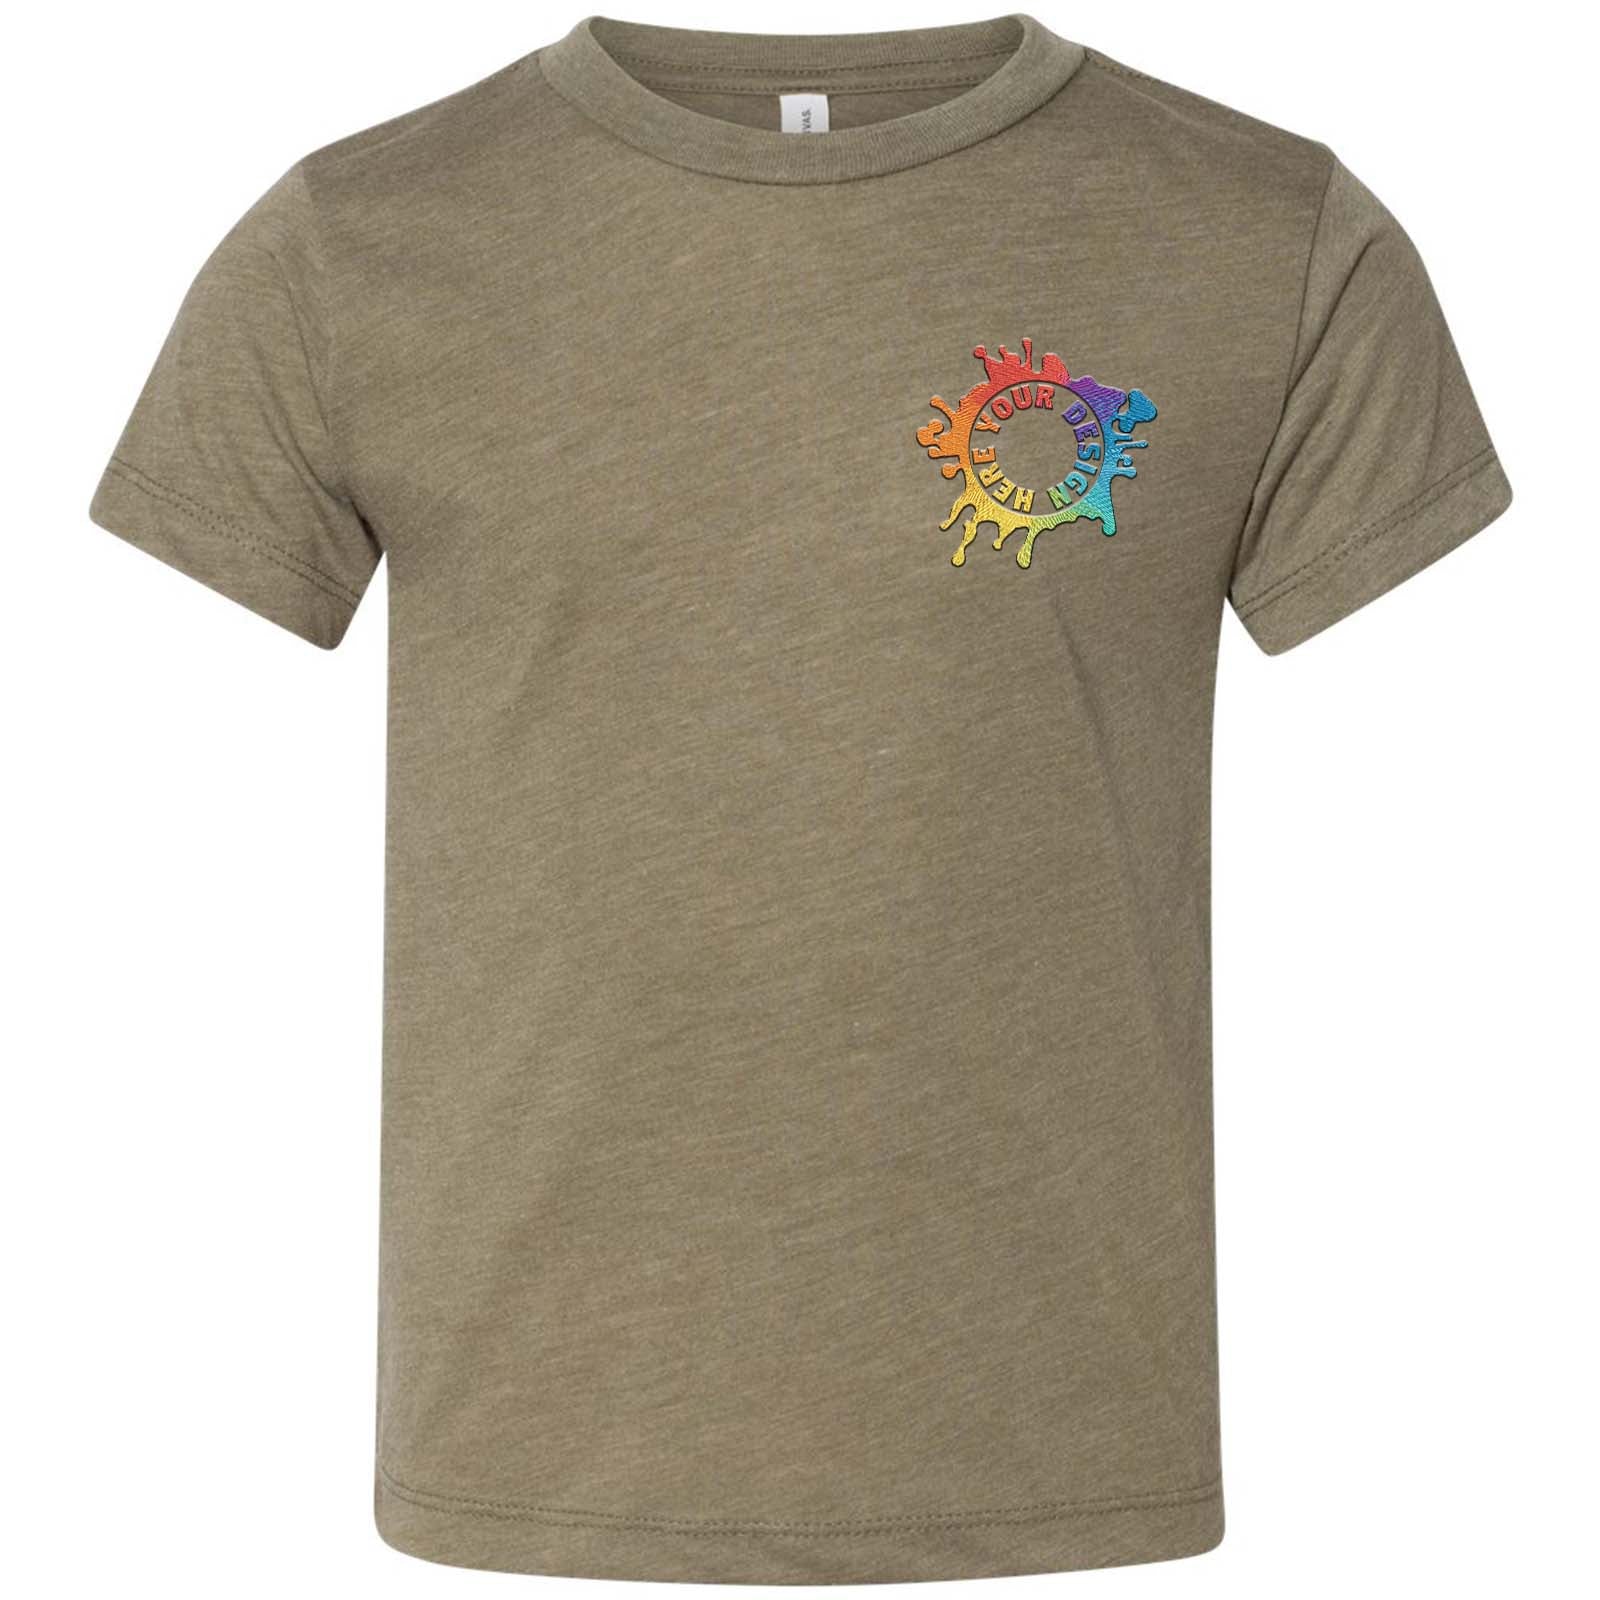 Bella + Canvas Toddler Triblend T-Shirt Embroidery